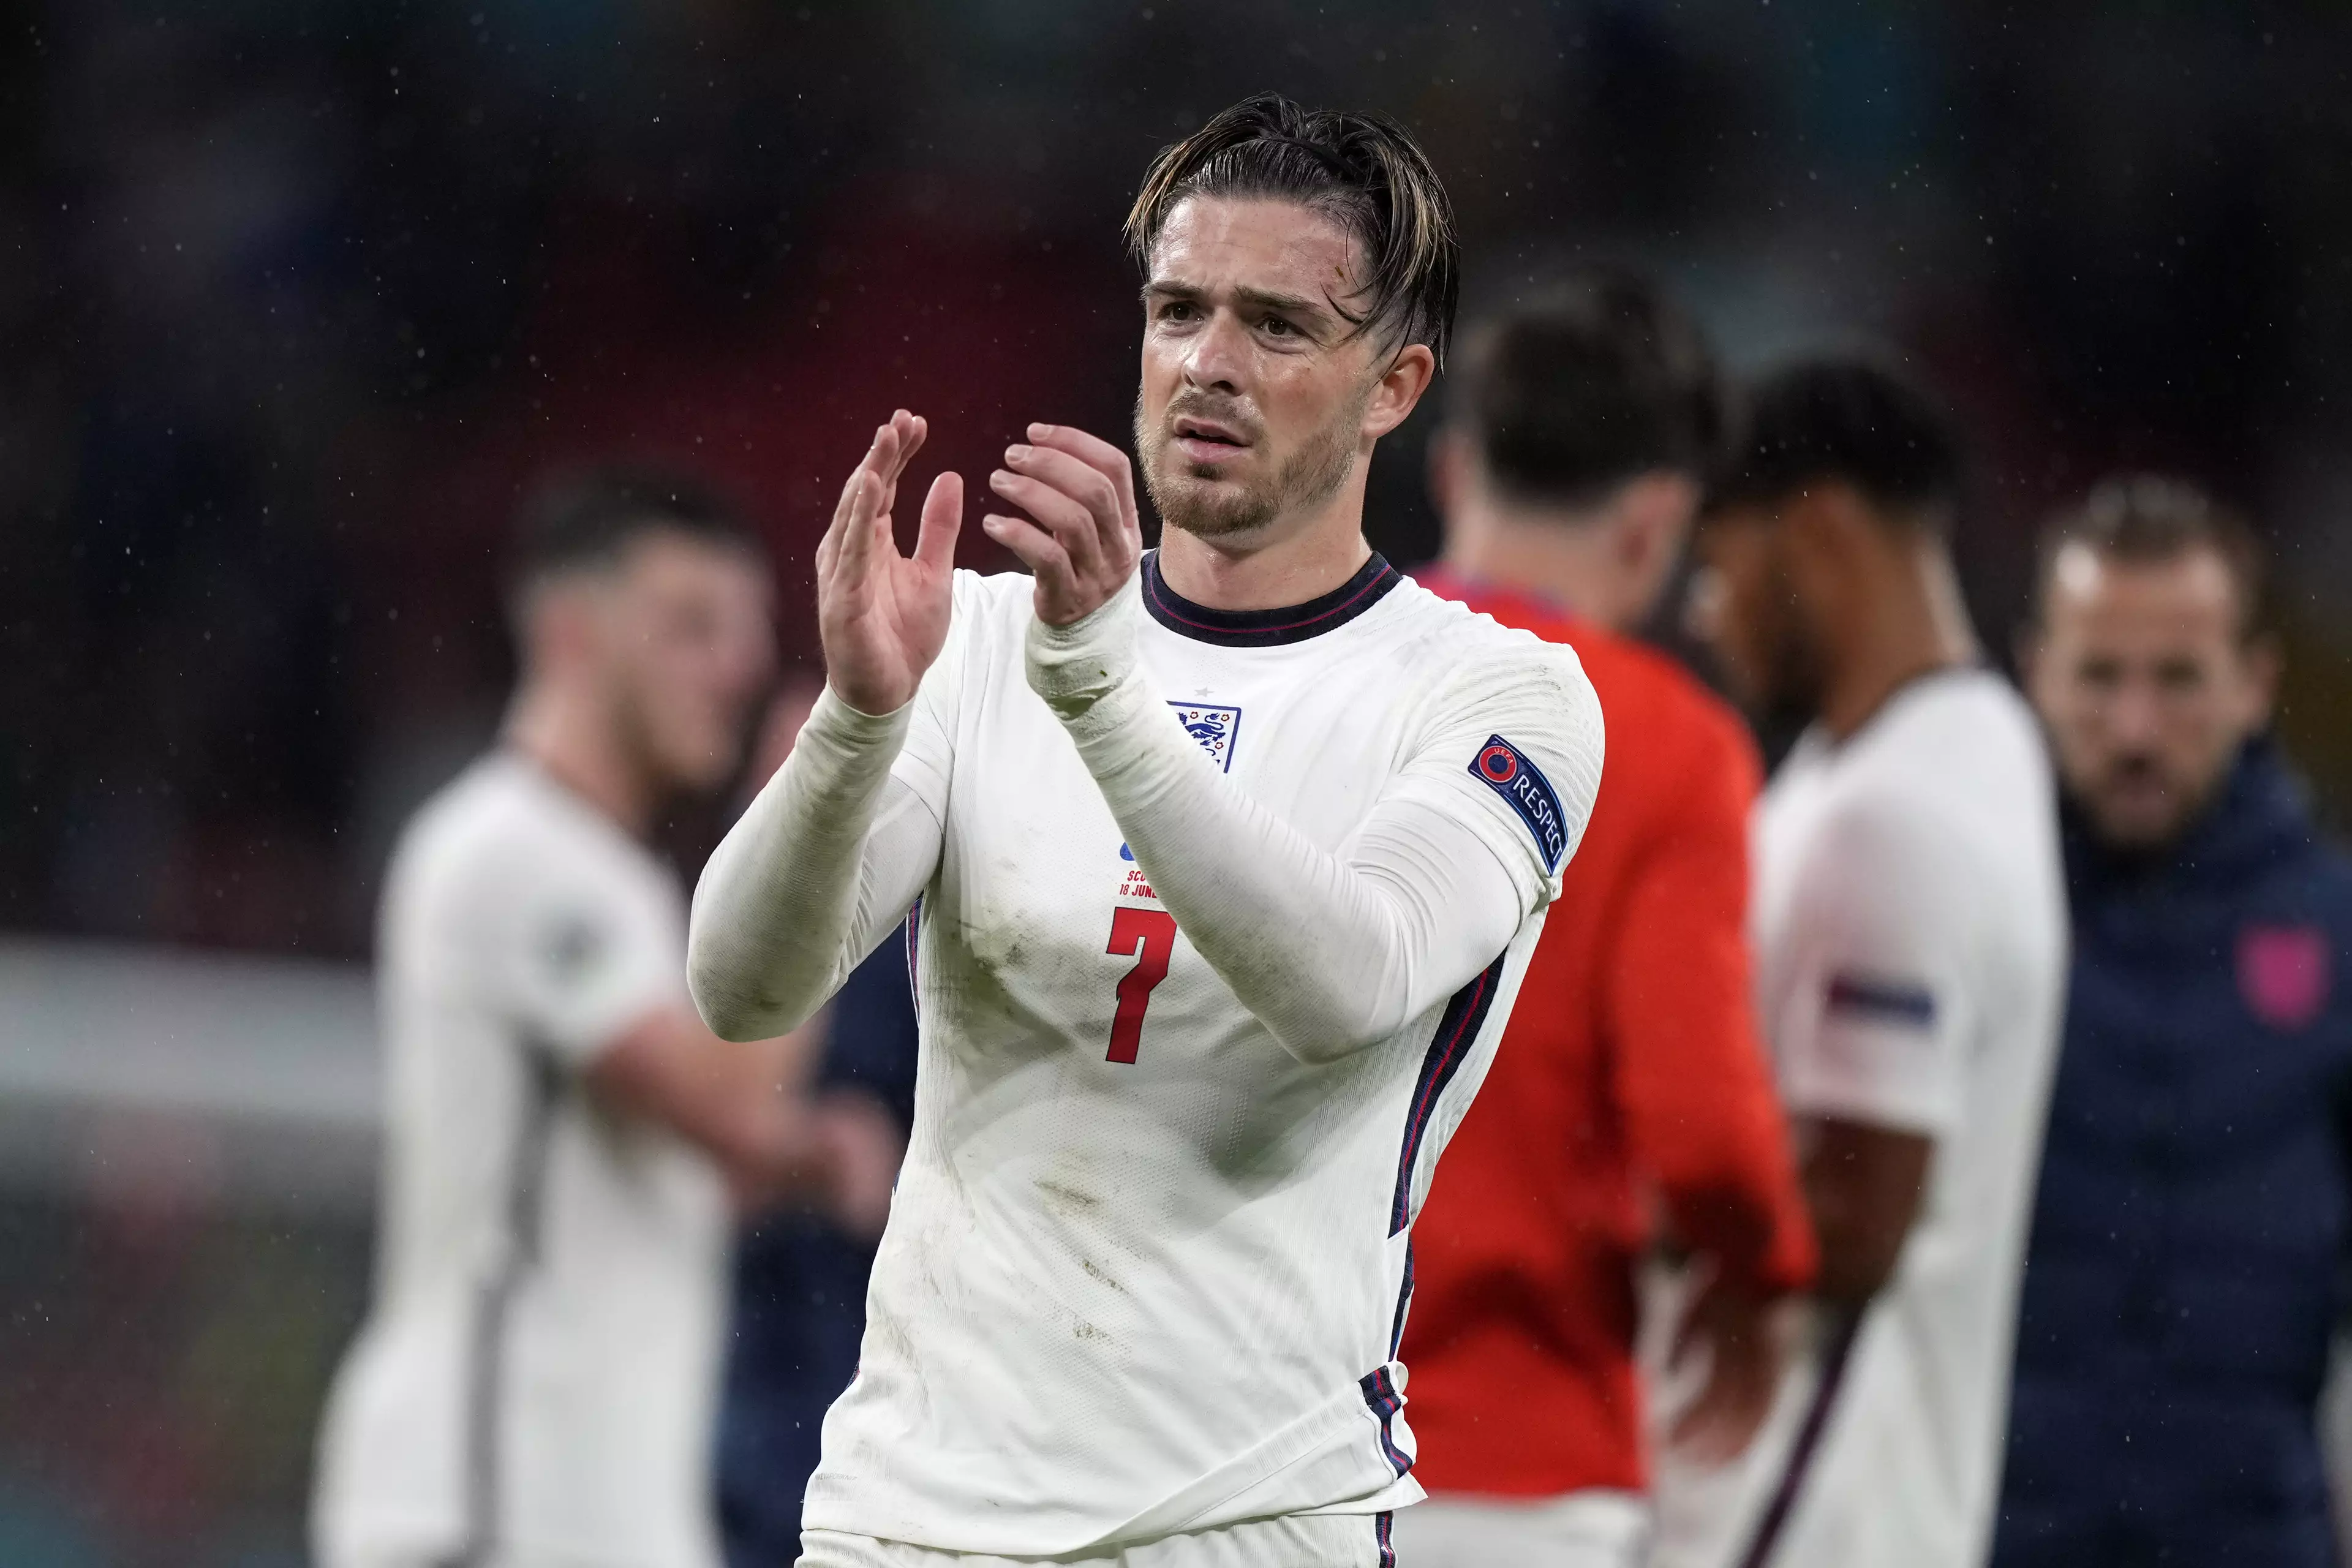 Jack Grealish could start for England after an impressive cameo against Scotland on Friday